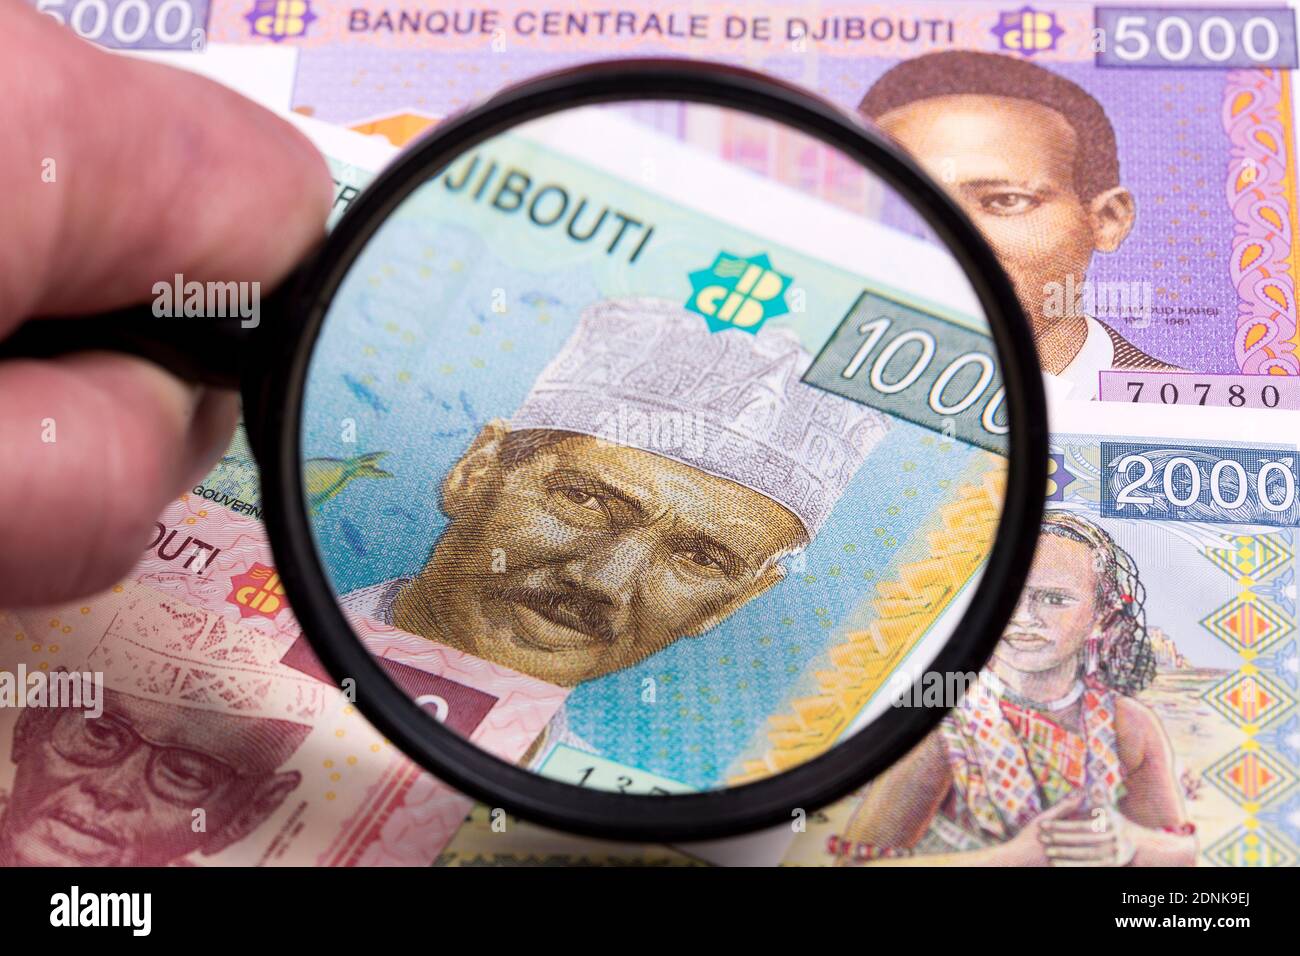 Djiboutian money in a magnifying glass Stock Photo